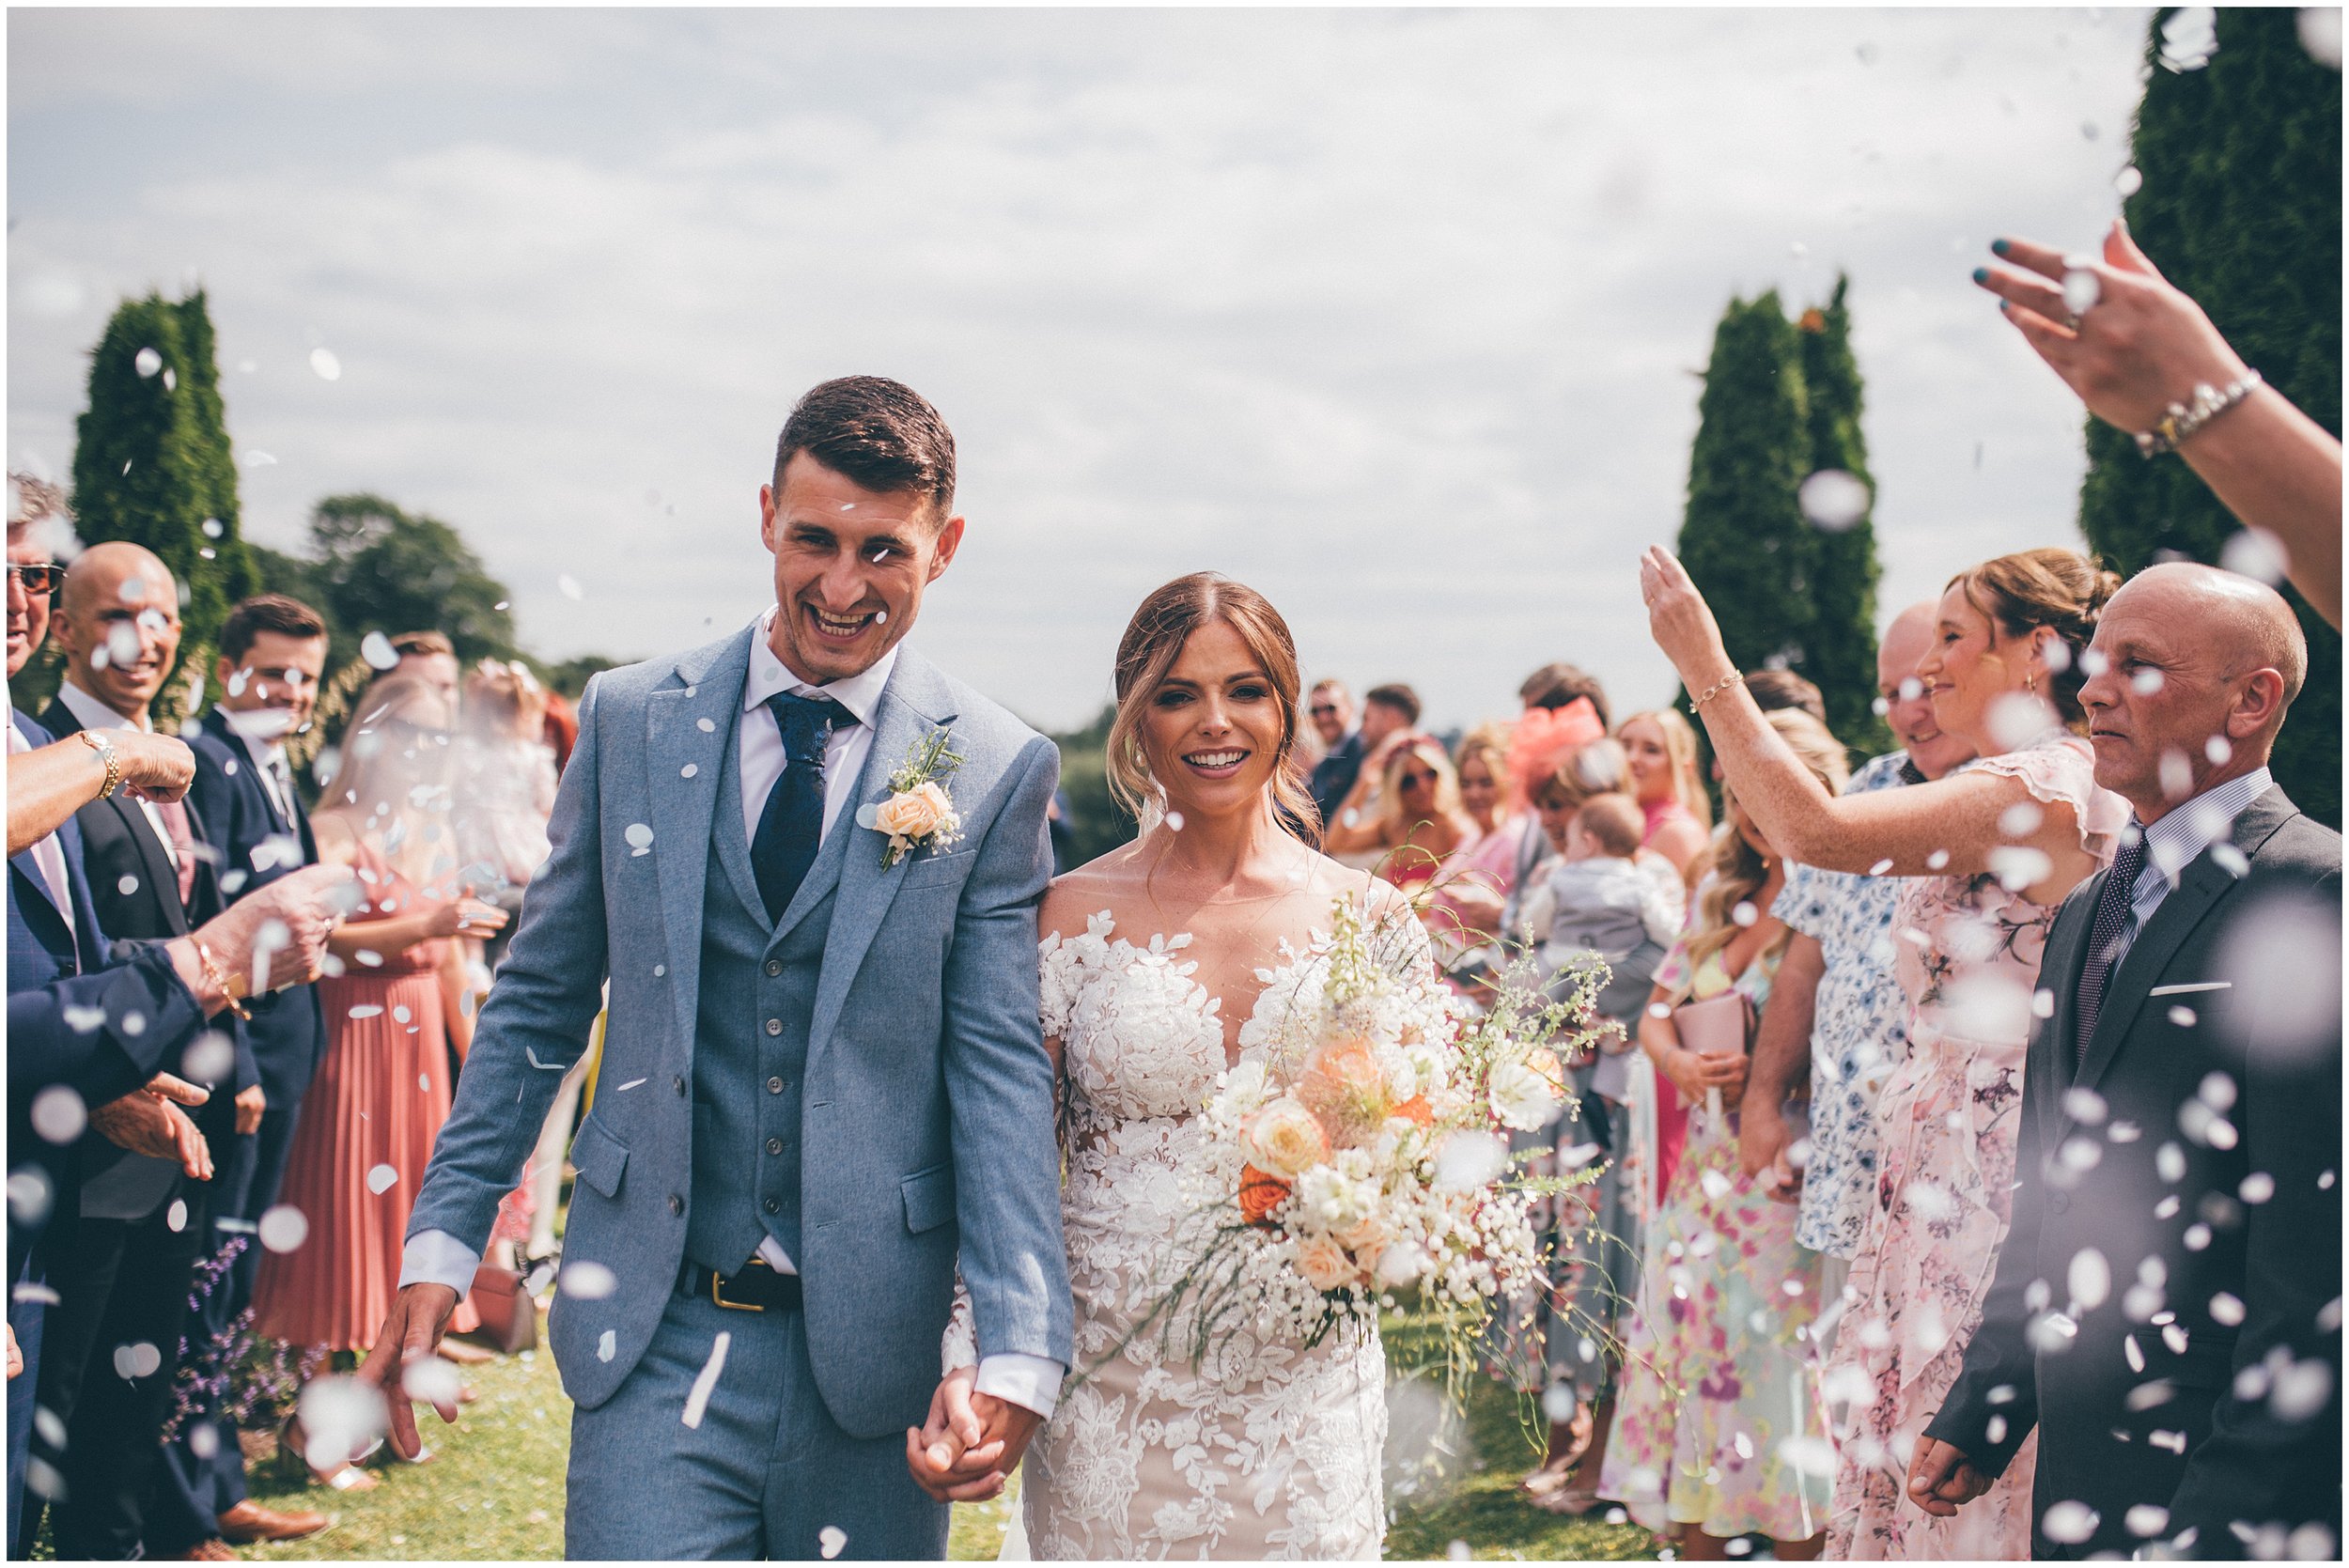 Bride and groom have an outdoor wedding ceremony in Cheshire at Abbeywood Estate wedding venue in Delamere.